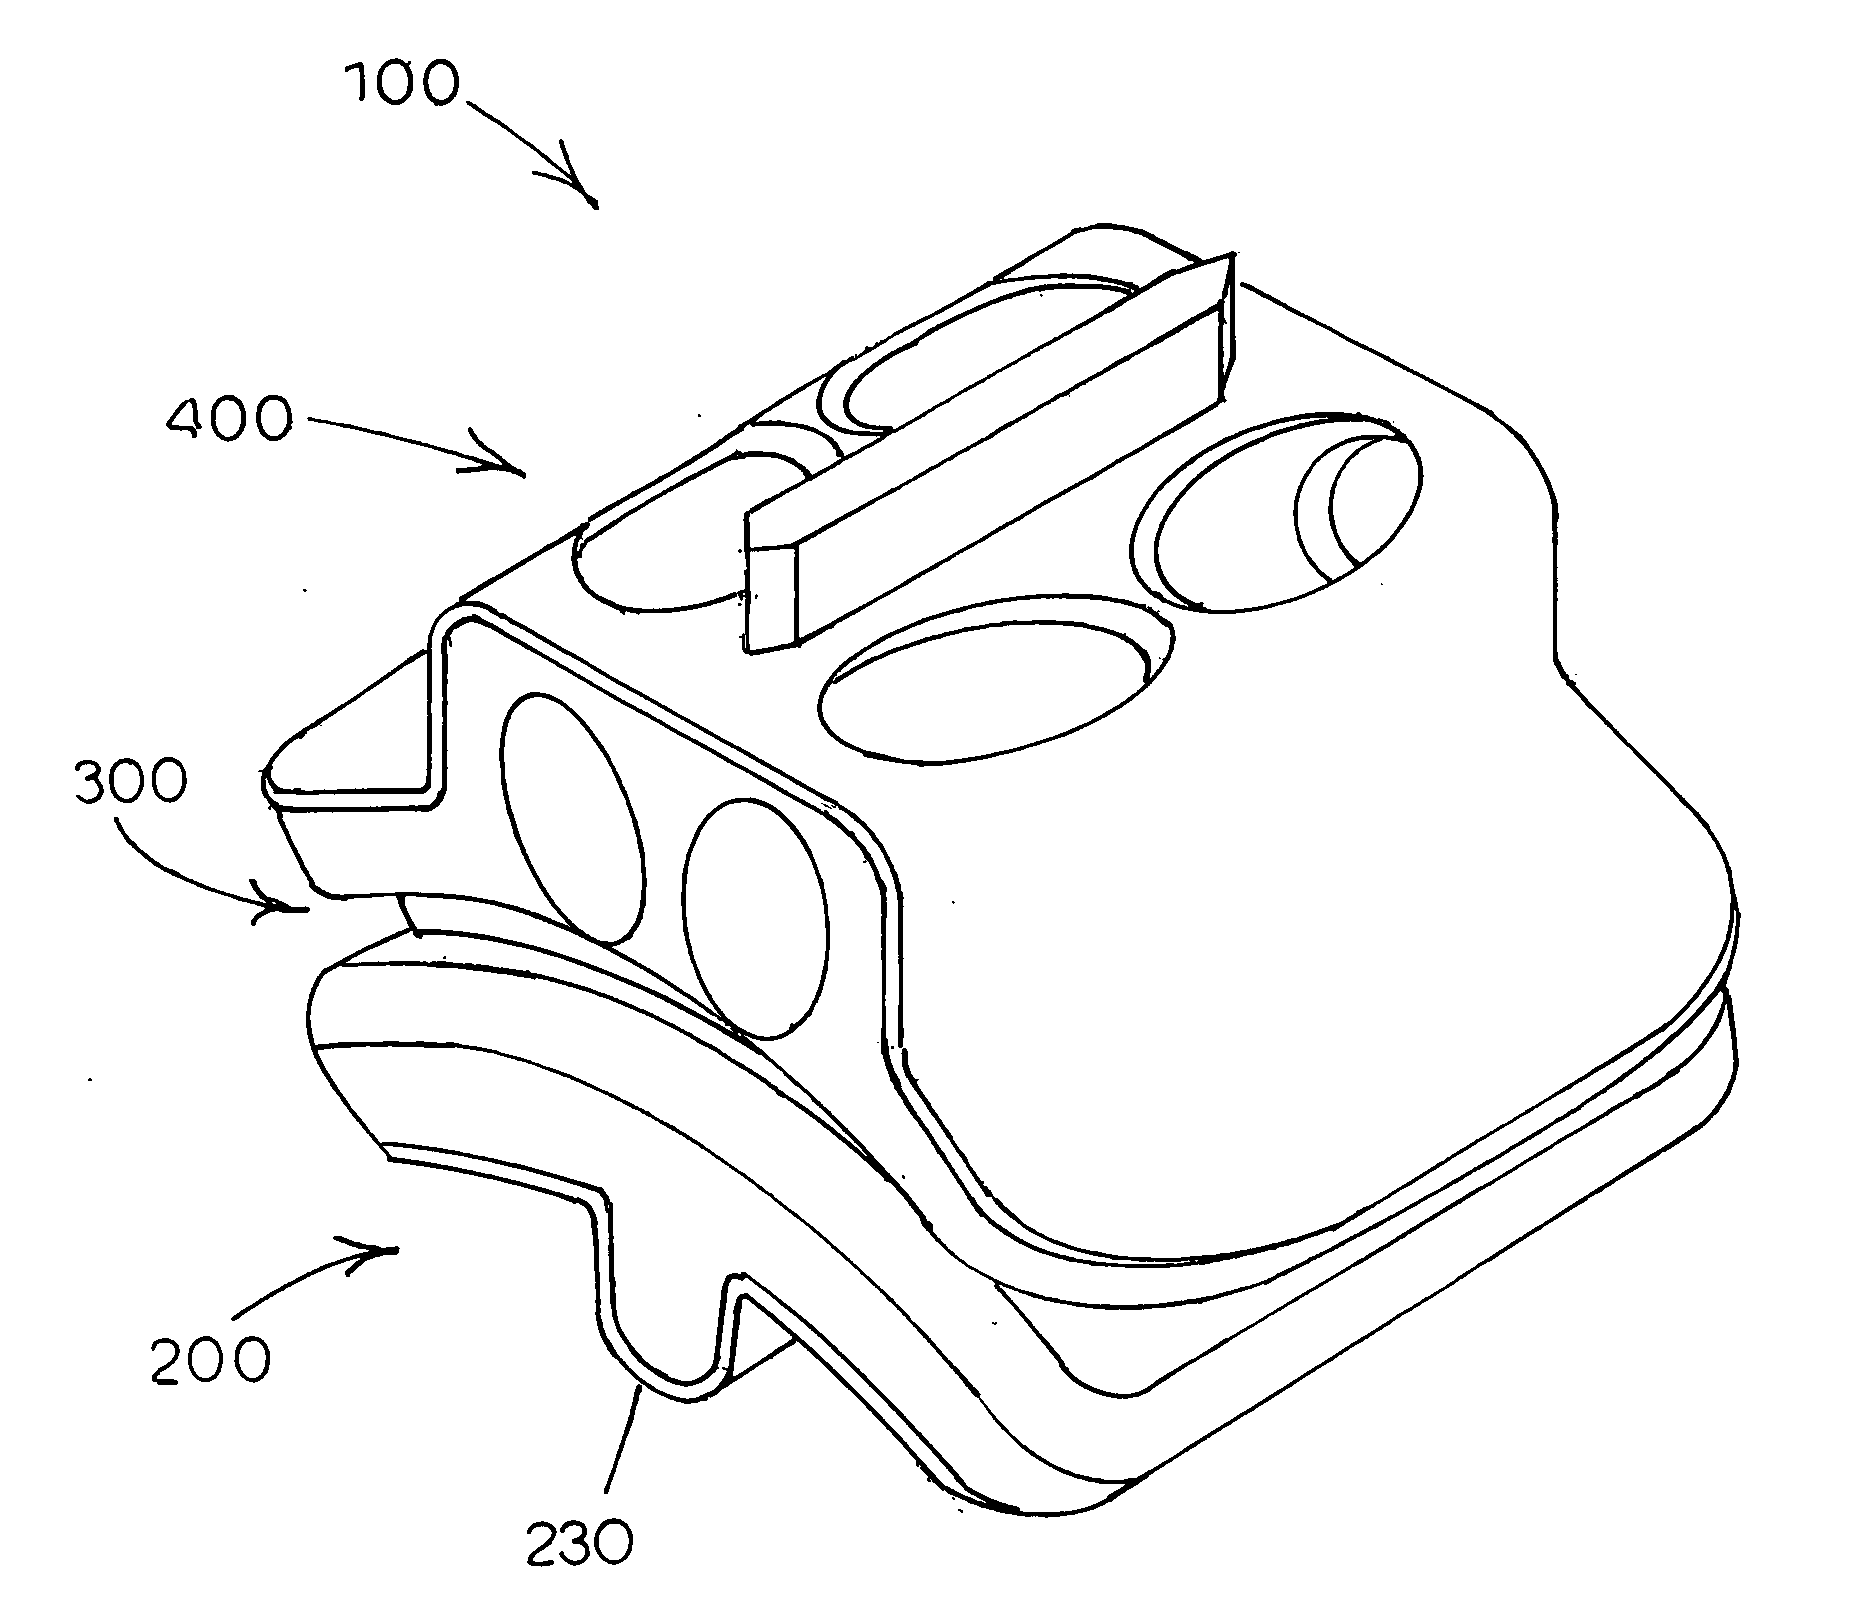 Modular total ankle prosthesis apparatuses, systems and methods, and systems and methods for bone resection and prosthetic implantation